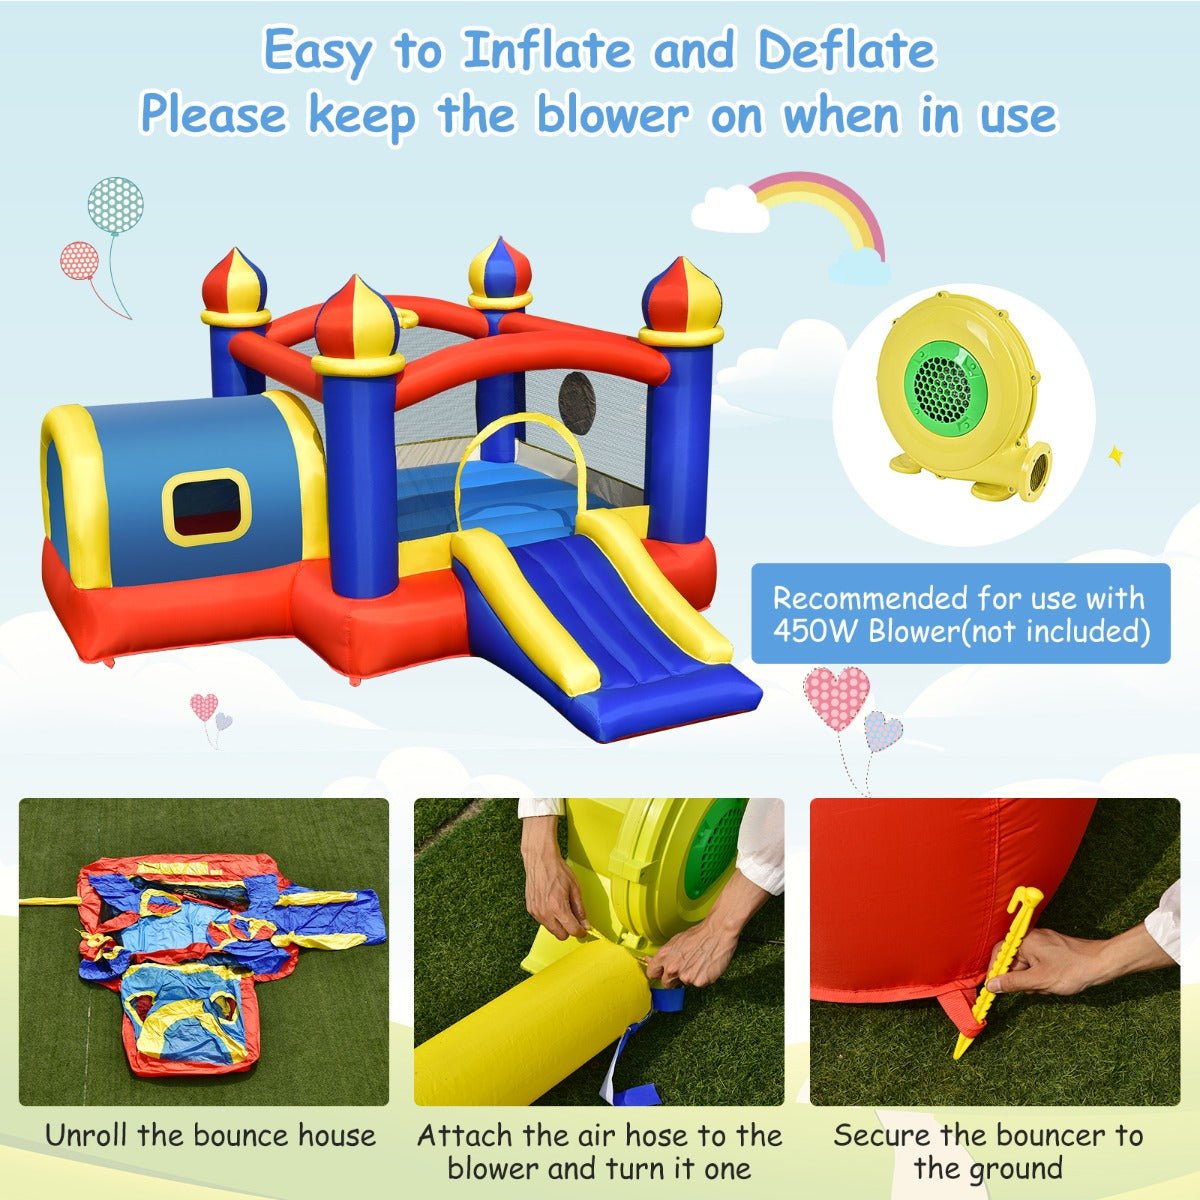 Kids Outdoor Inflatable Play Structure - Bounce, Slide, and More!